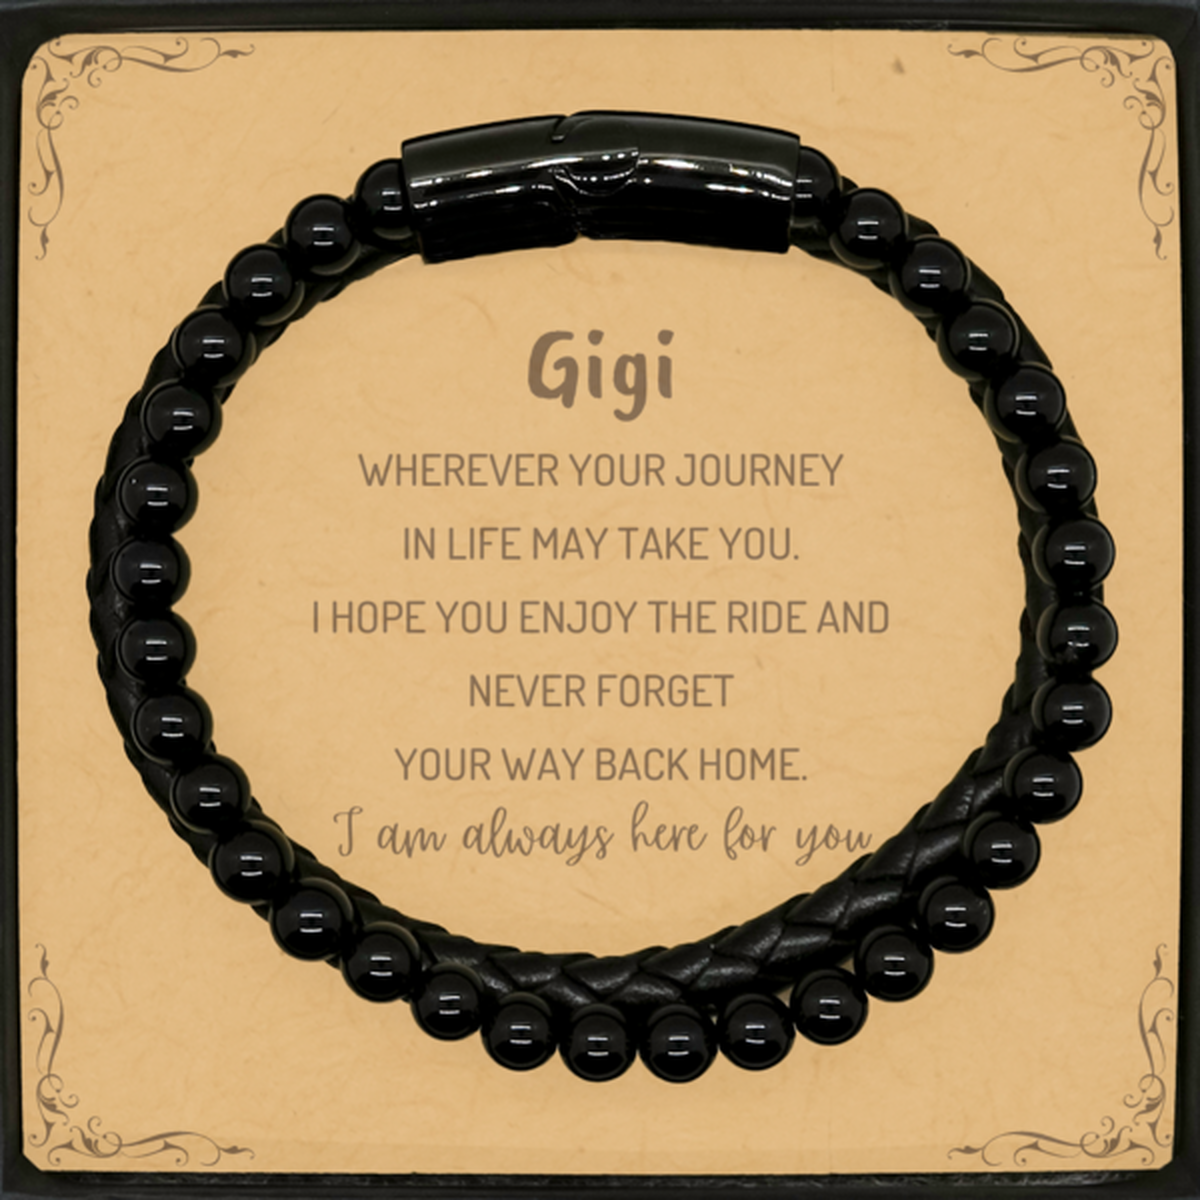 Gigi wherever your journey in life may take you, I am always here for you Gigi Stone Leather Bracelets, Awesome Christmas Gifts For Gigi Message Card, Gigi Birthday Gifts for Men Women Family Loved One